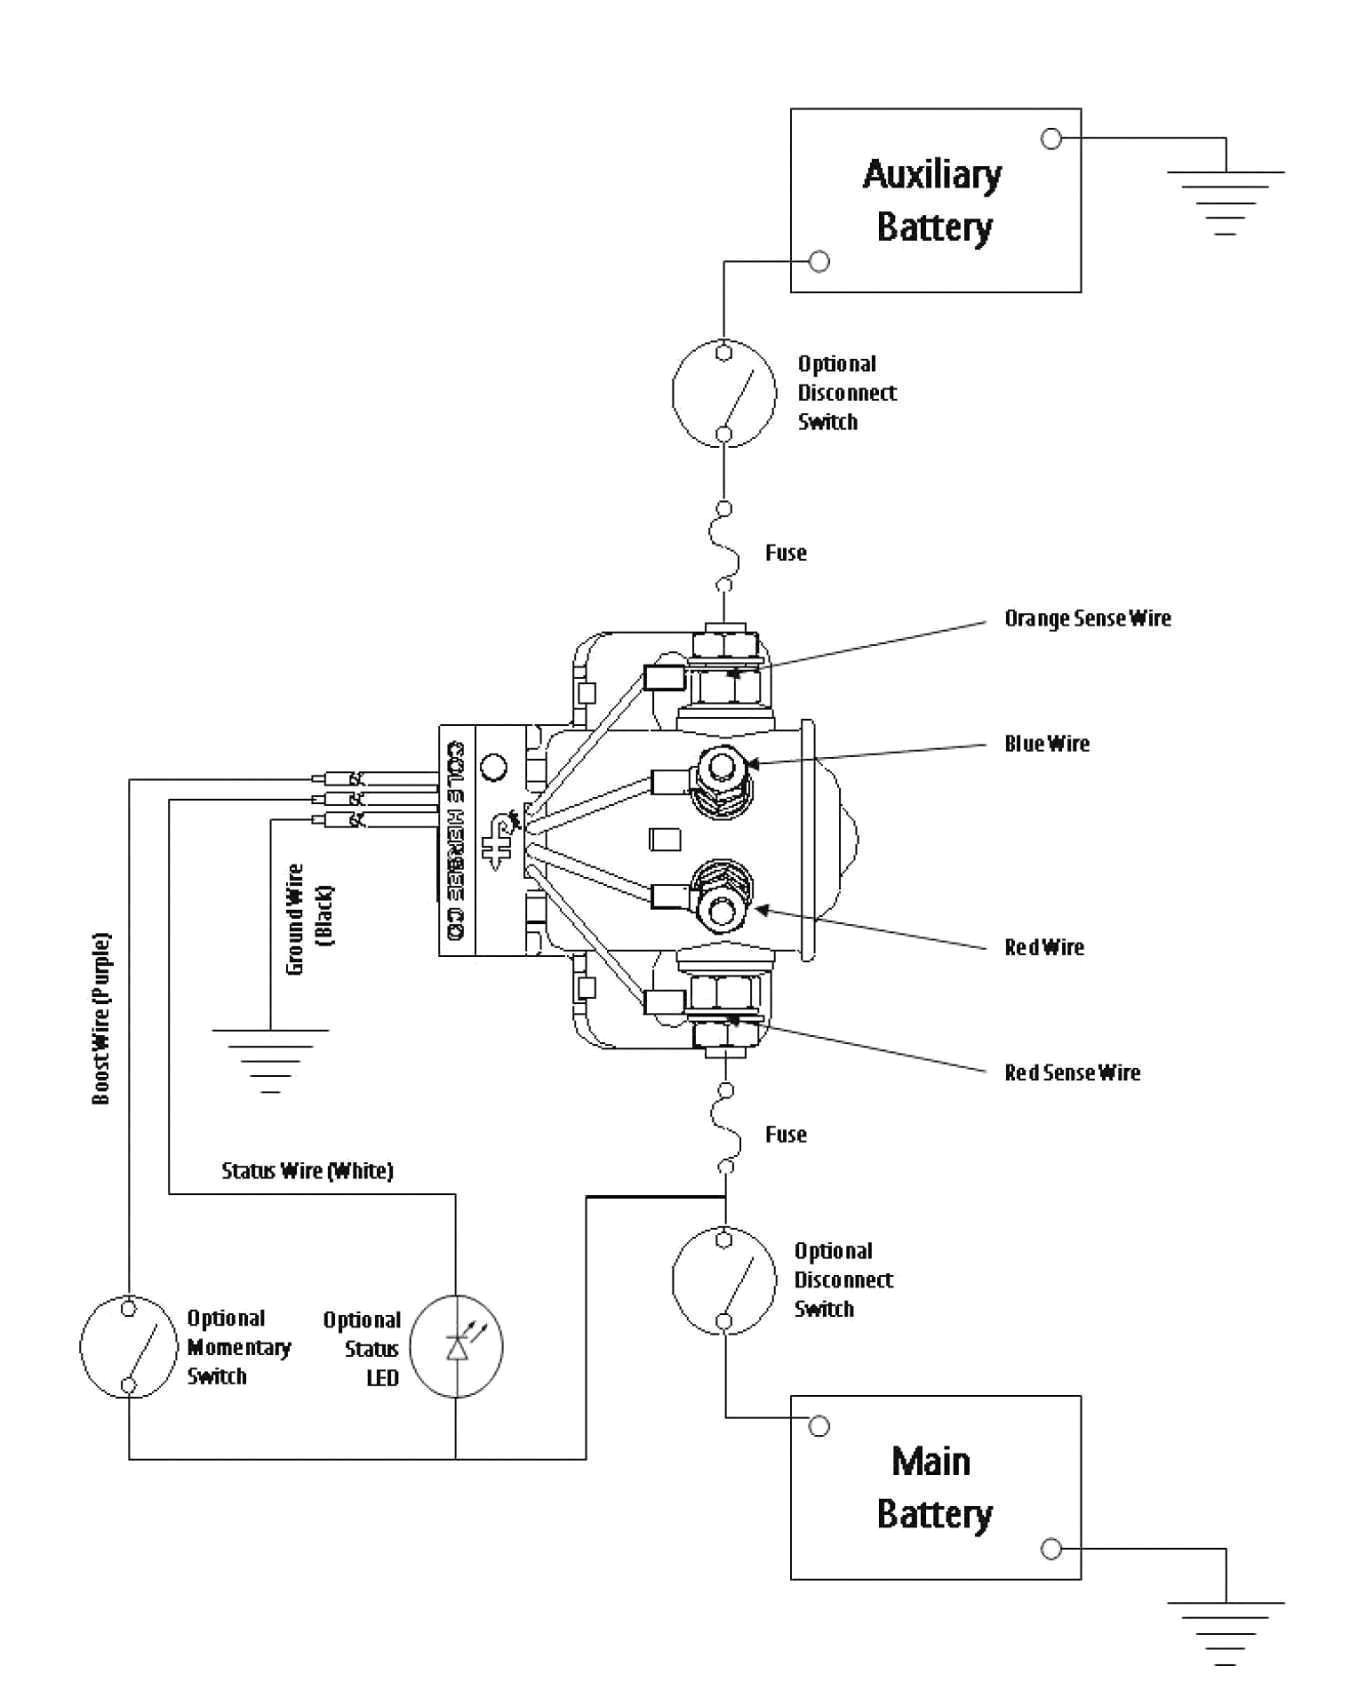 2 battery boat wiring diagram awesome boat audio wiring diagram best boat audio wiring diagram fresh jpg